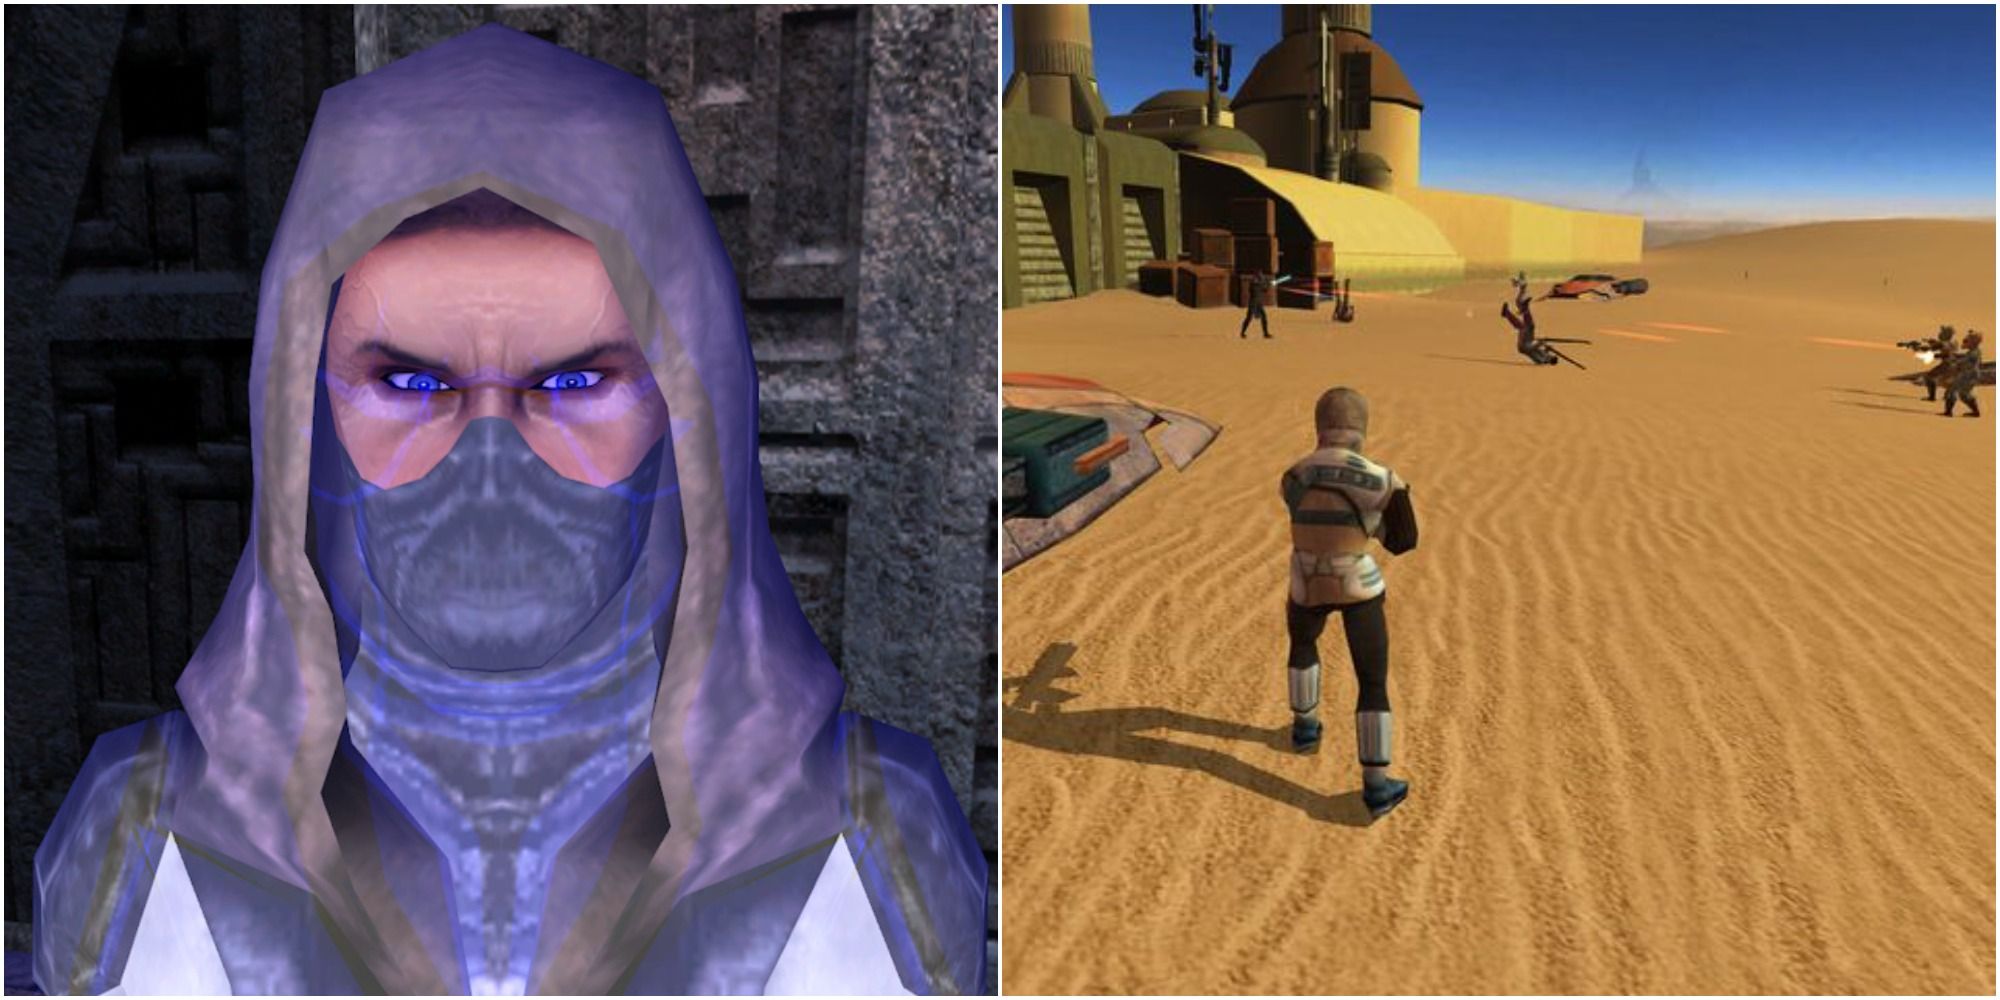 Ajunta Pall's ghost (left) and the Genoharadan in combat on Tatooine (right)